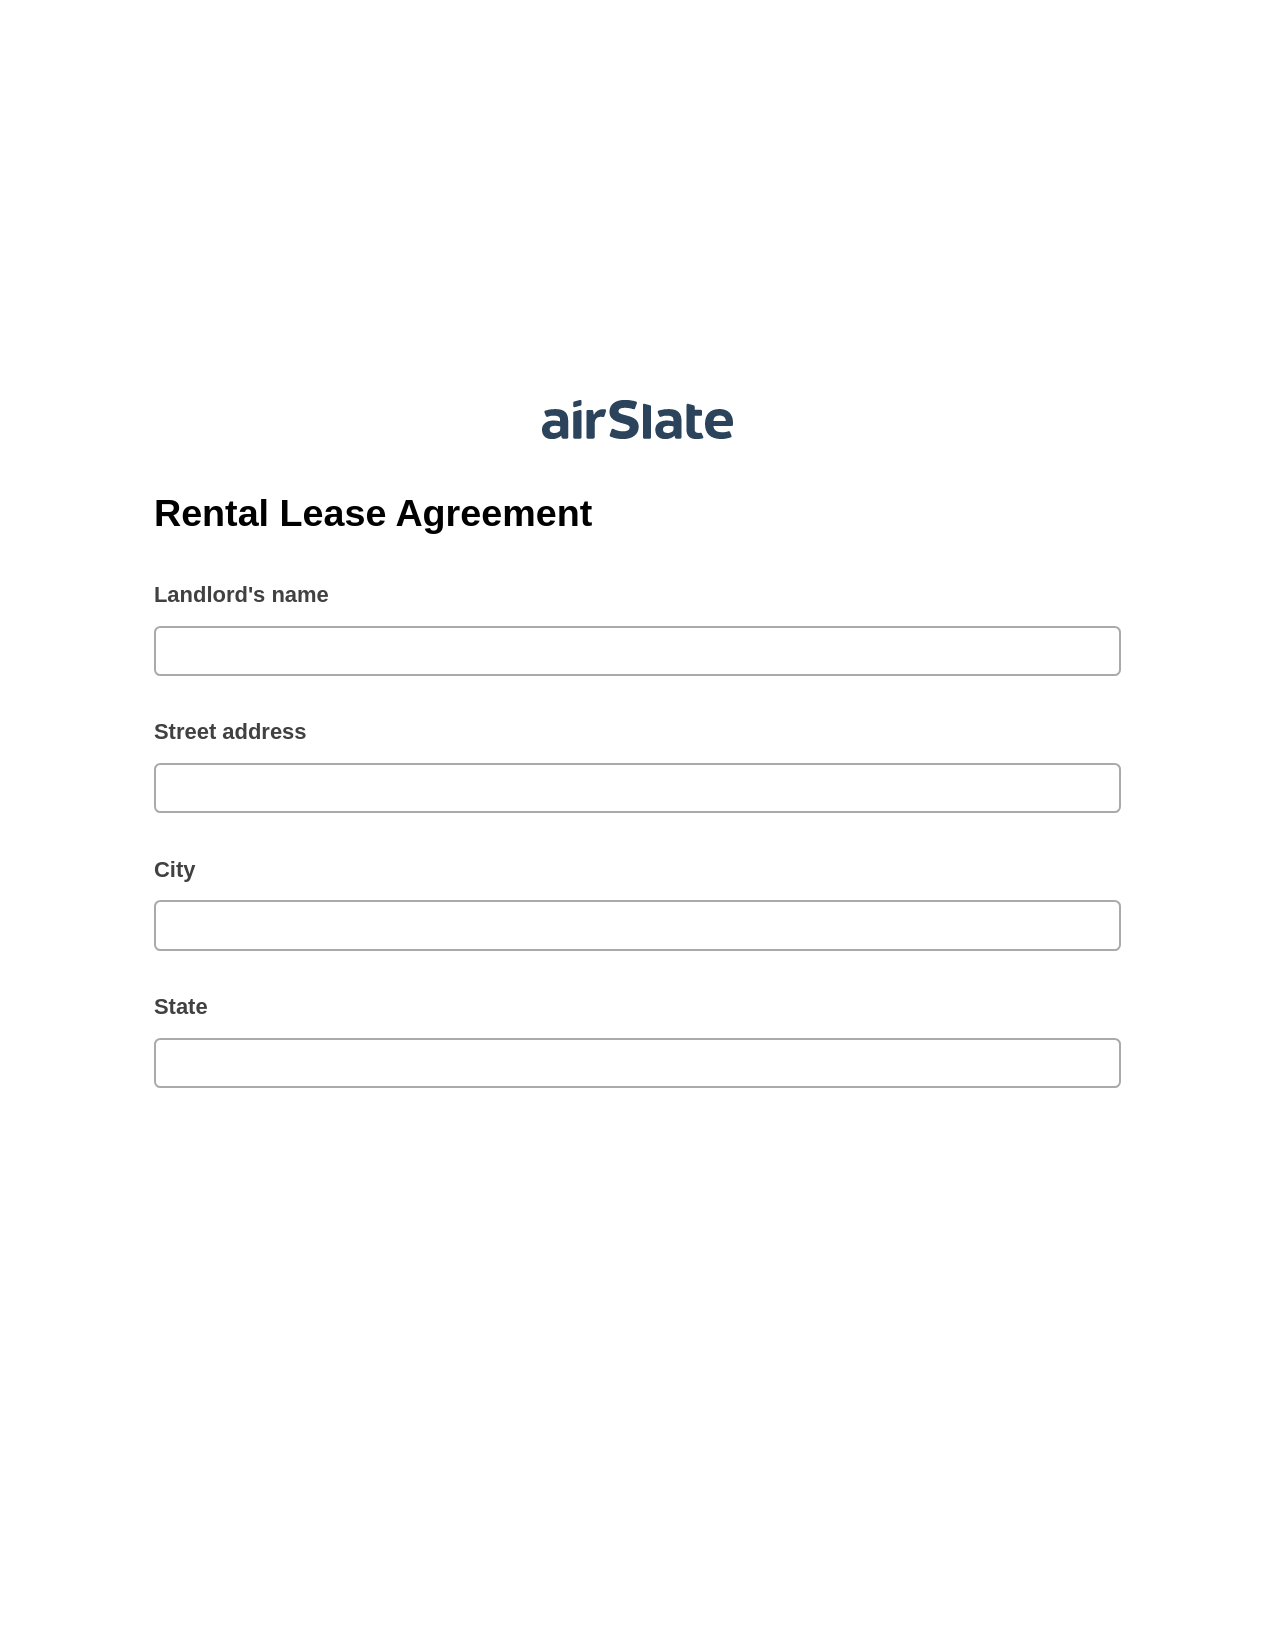 Rental Lease Agreement Pre-fill from Salesforce Record Bot, Invoke Salesforce Process Bot, Export to NetSuite Record Bot